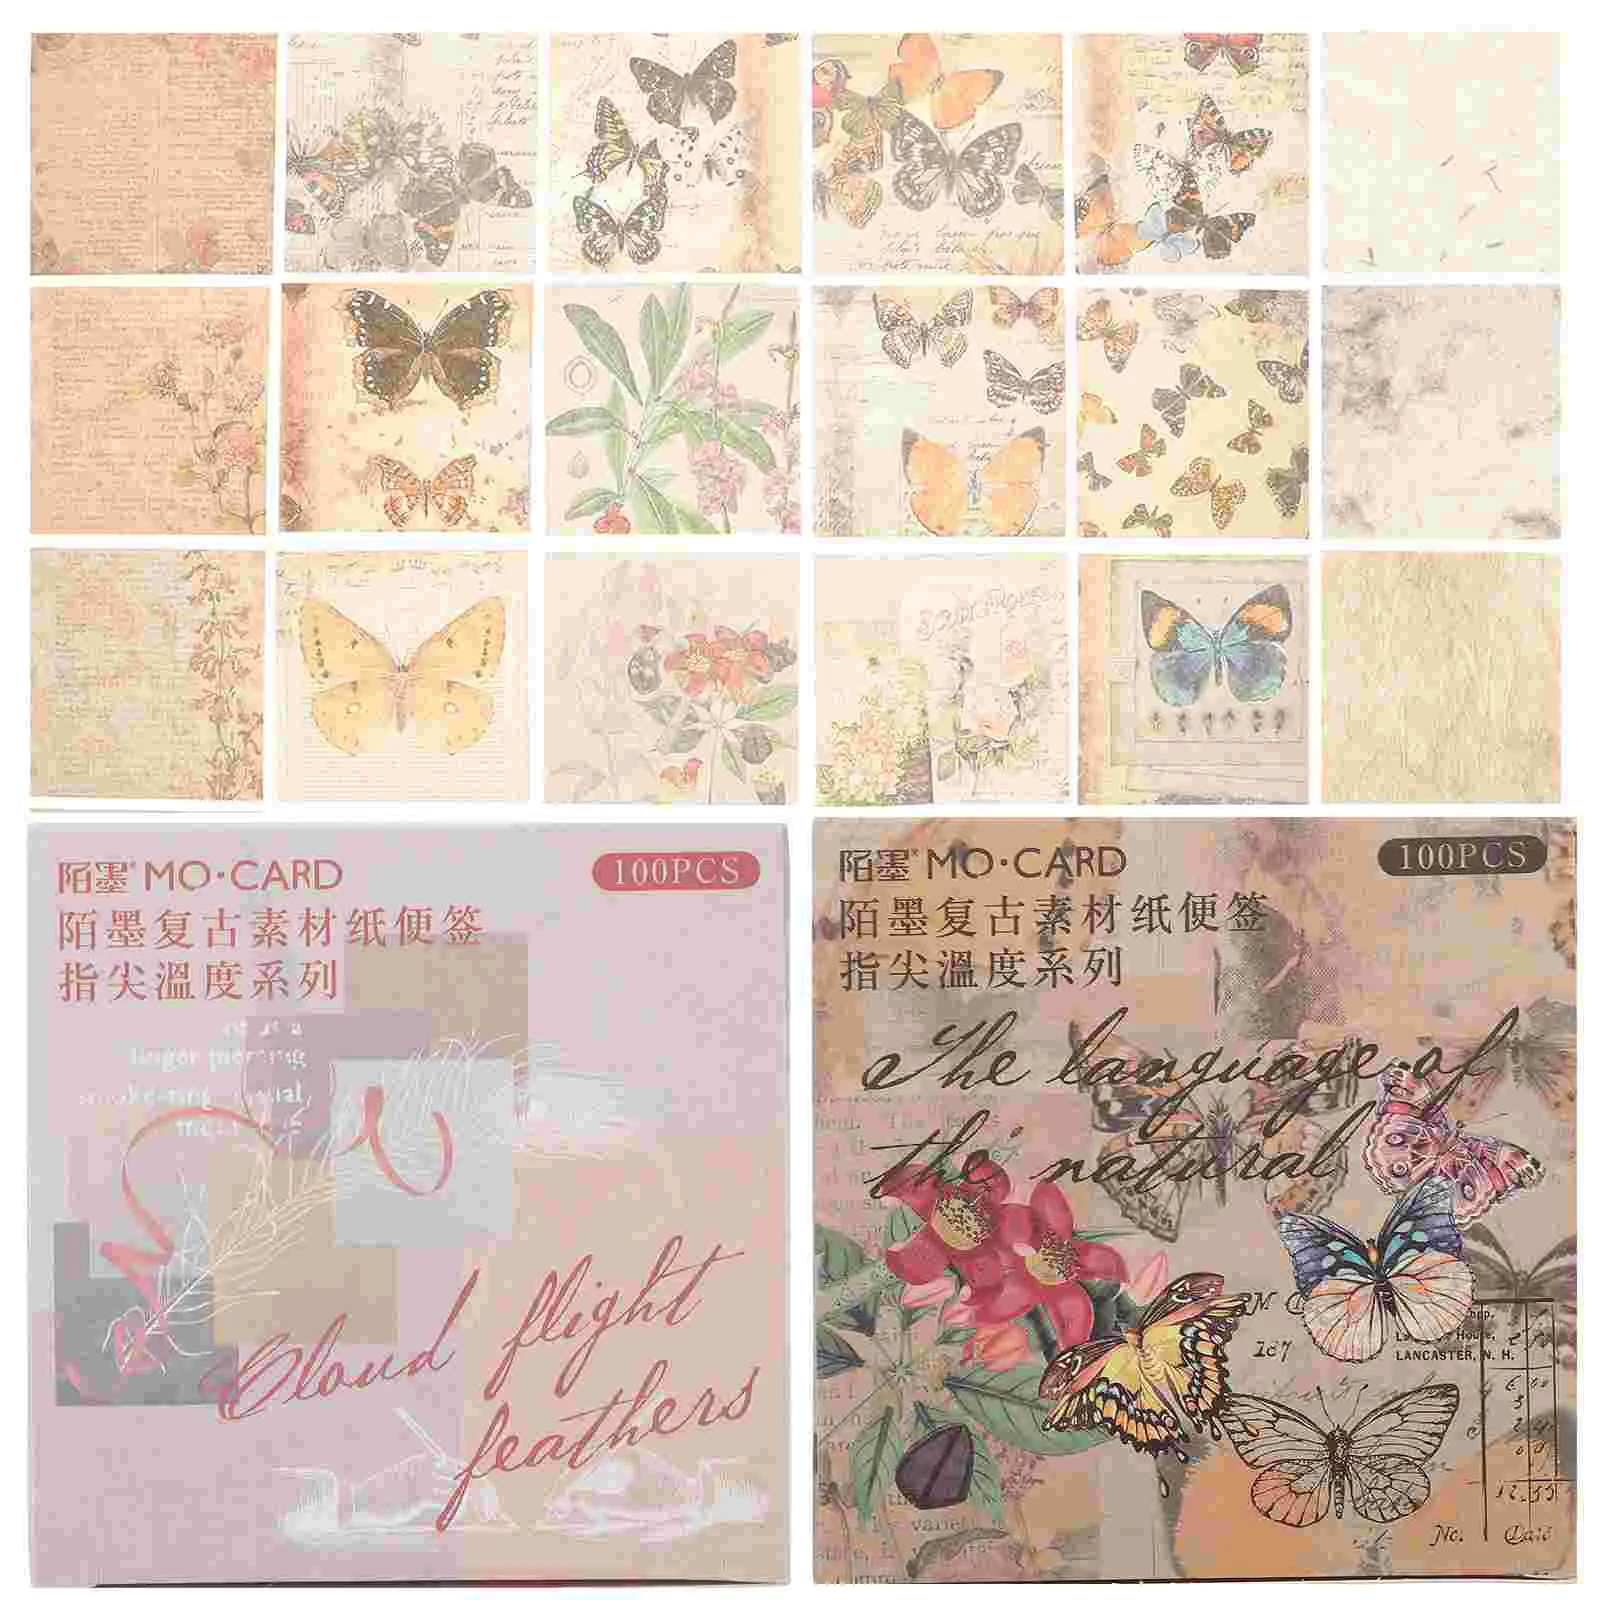 

200 Sheets Pocket Backing Paper Botanical Decors DIY Material Hand Account Decorative Scrapbooking Supplies Delicate